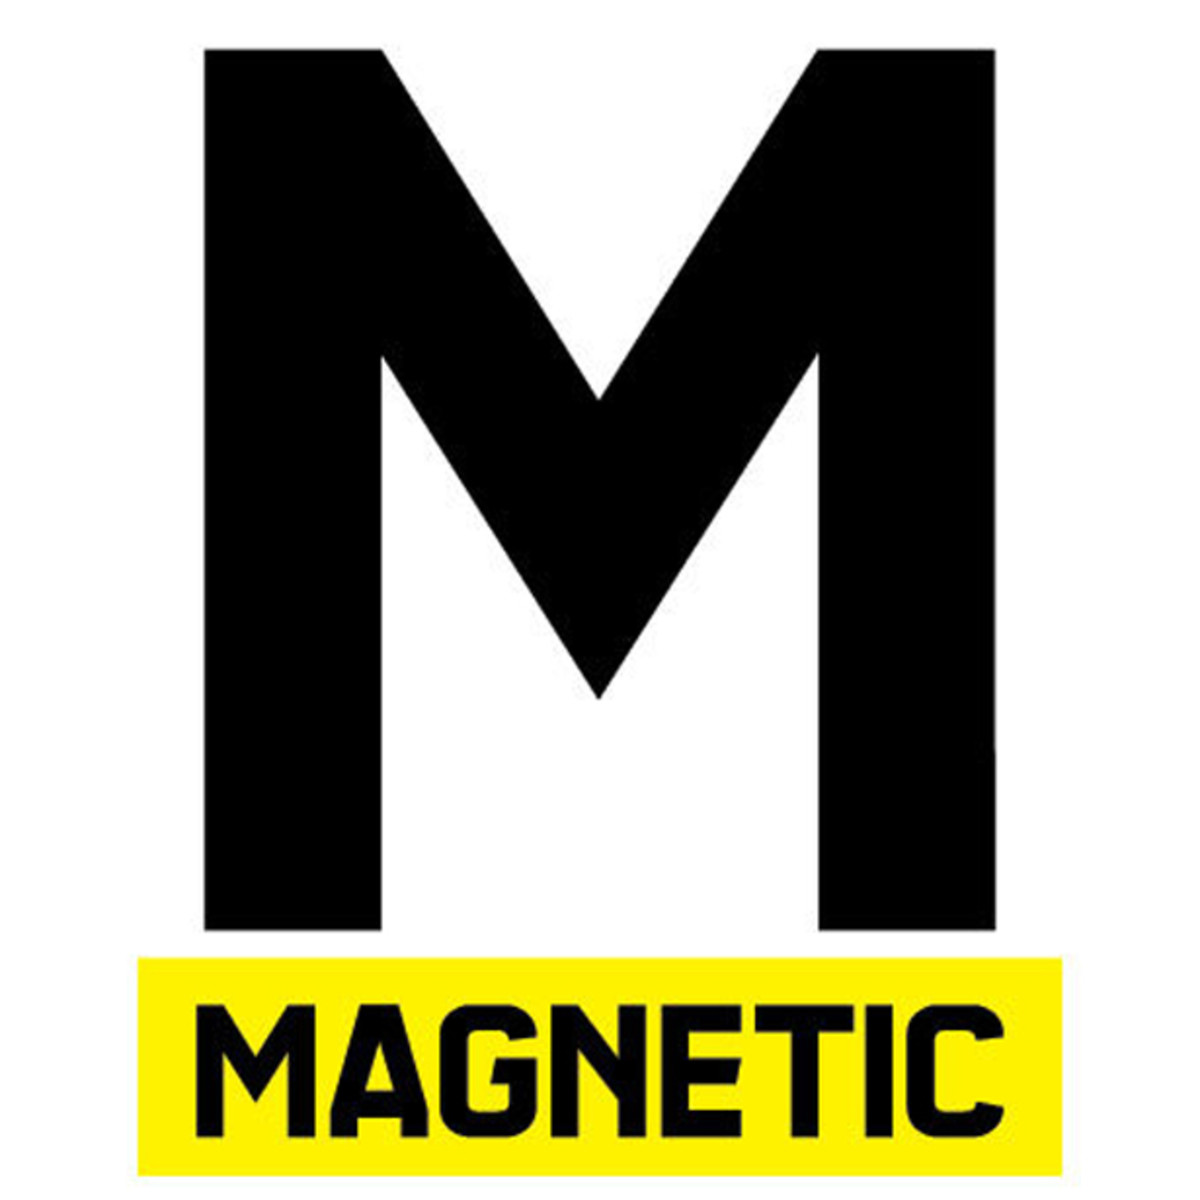 Magnetic Magazine Is Looking For An Intern For Its Hollywood Office